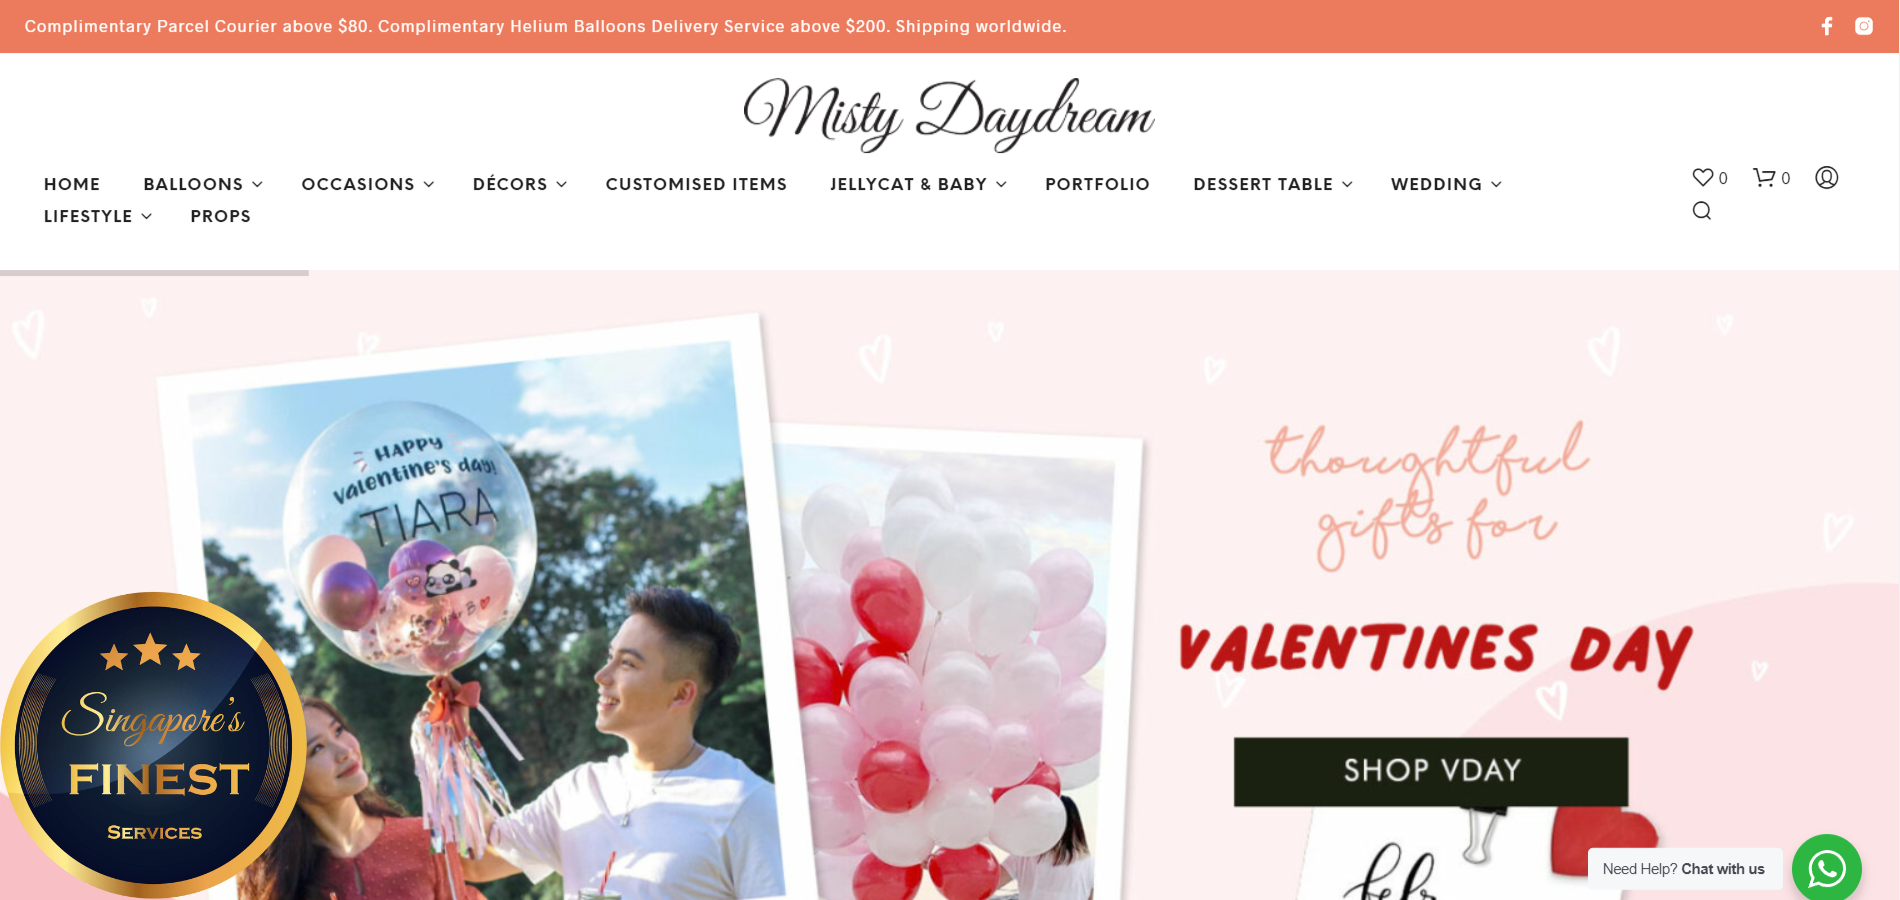 The Finest Balloon Delivery Services in Singapore